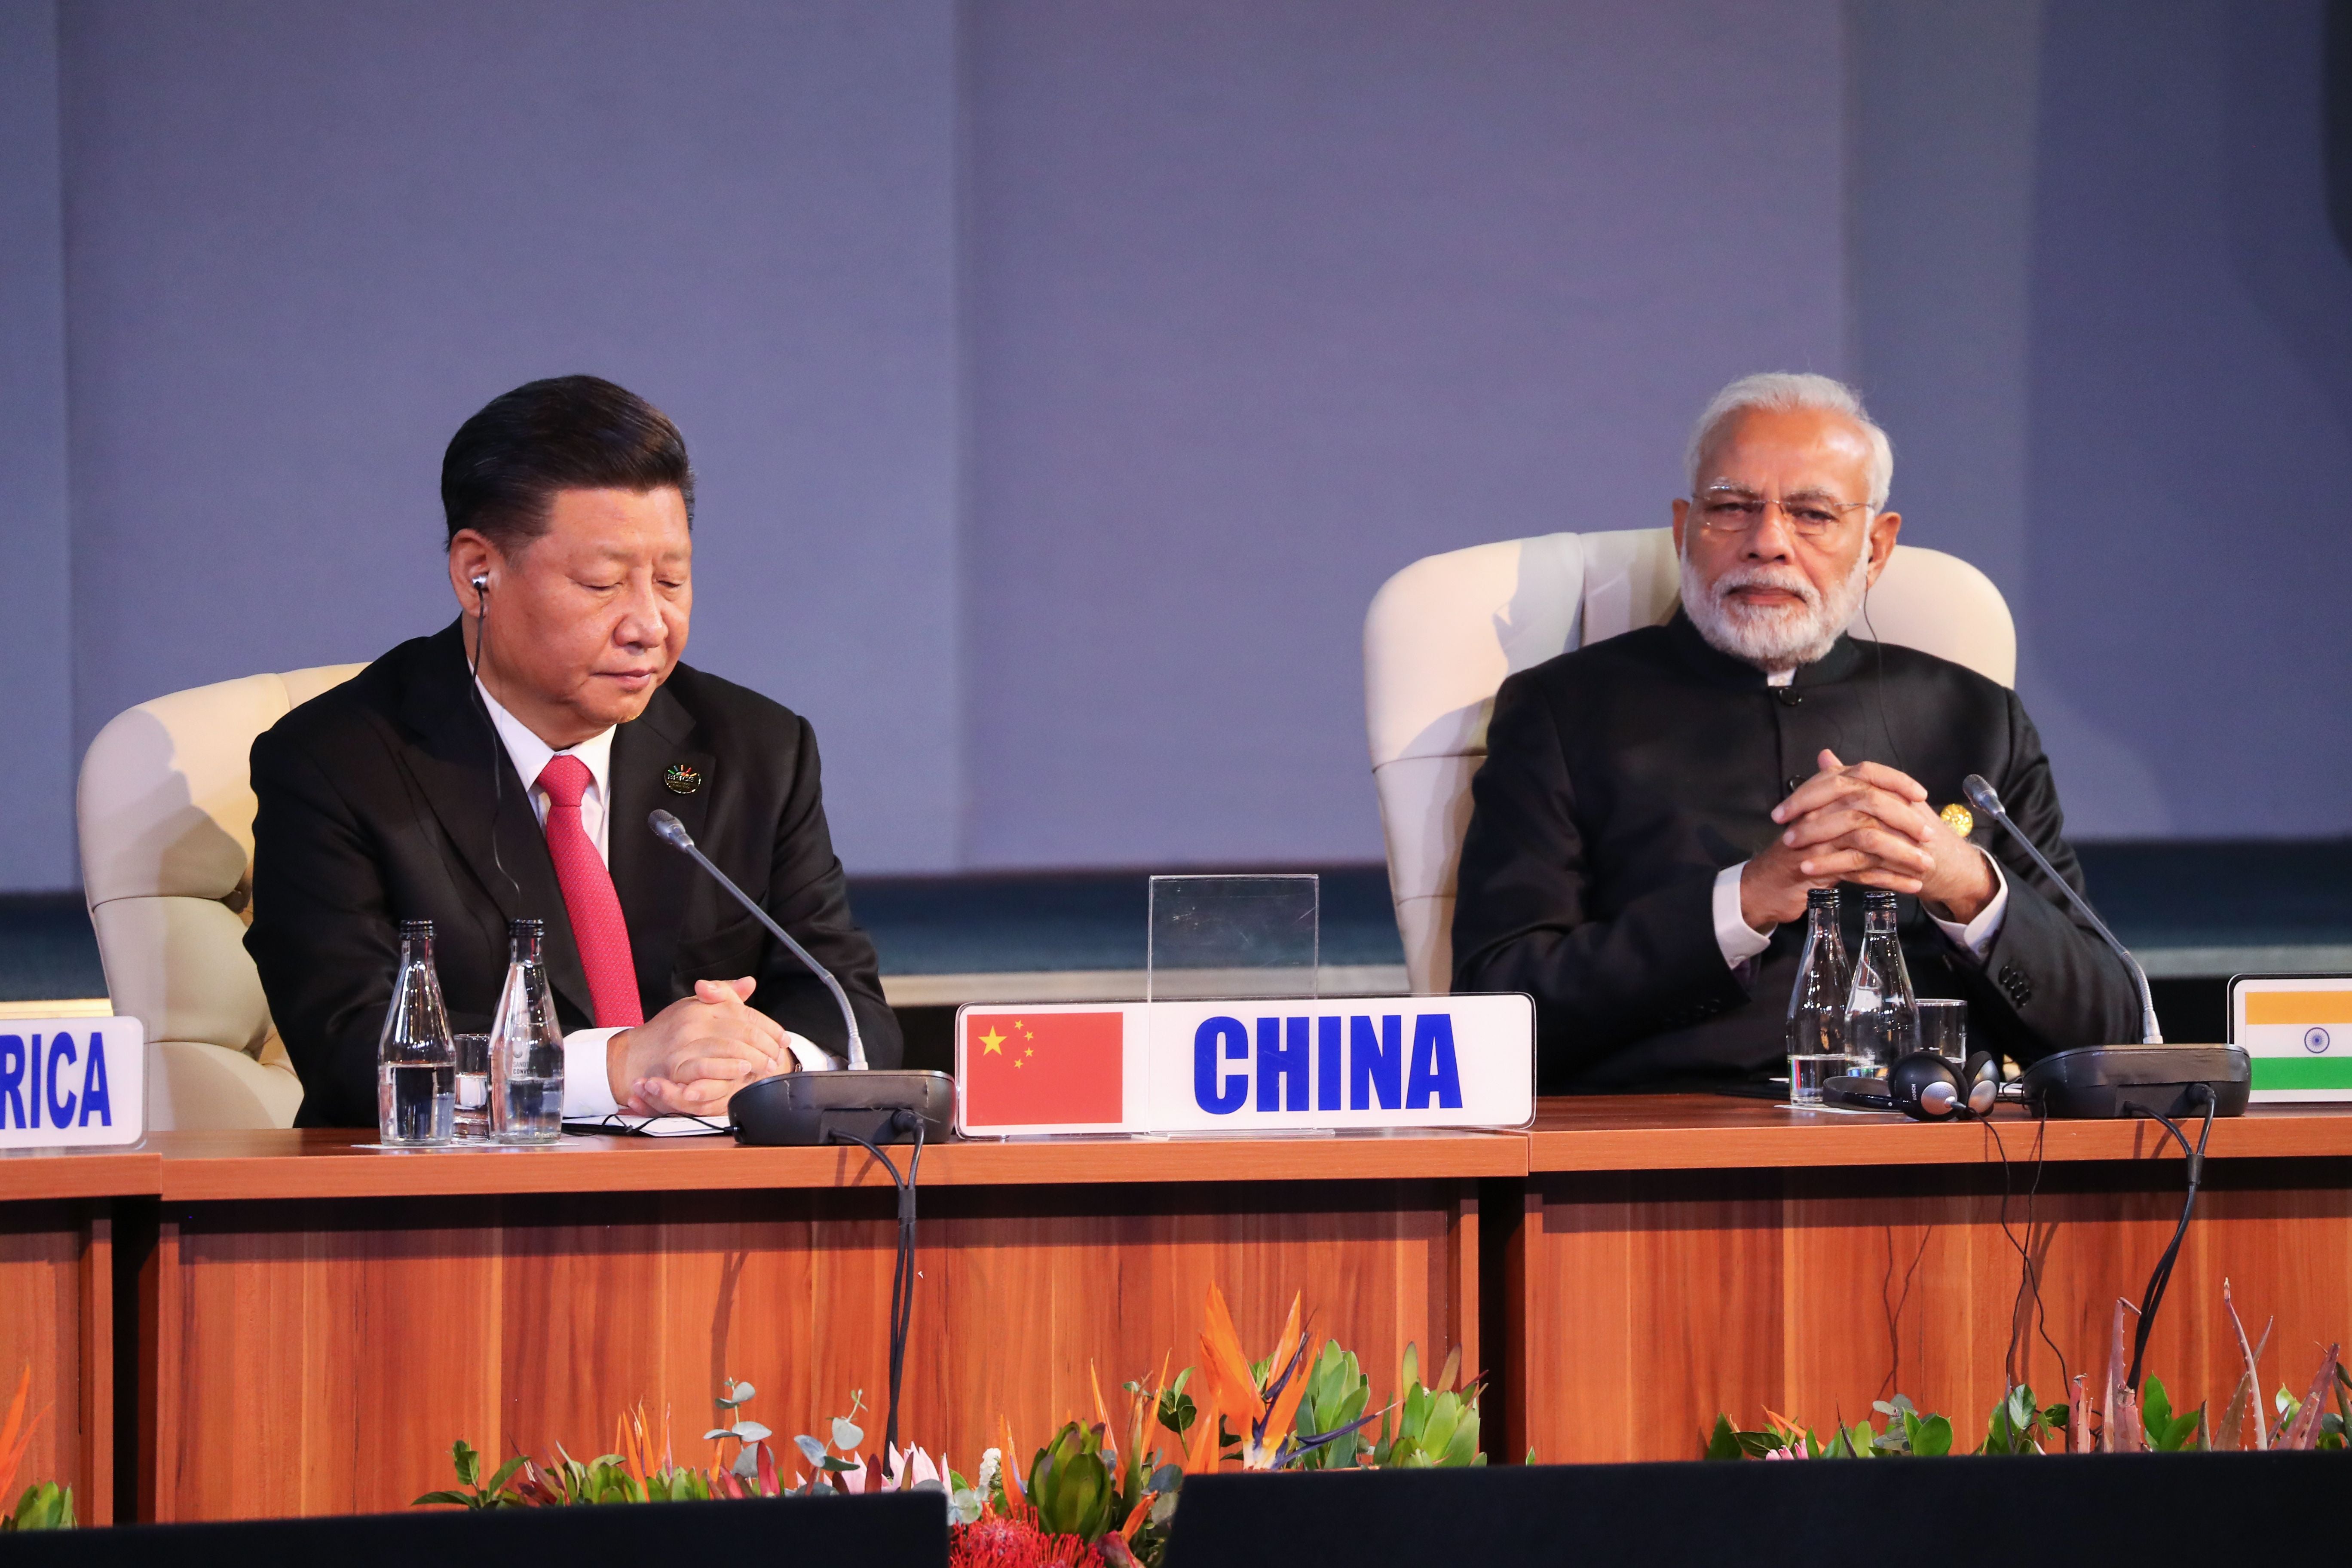 China’s president Xi Jinping and India’s Prime Minister Narendra Modi attend a session meeting during the 10th BRICS summit in 2018